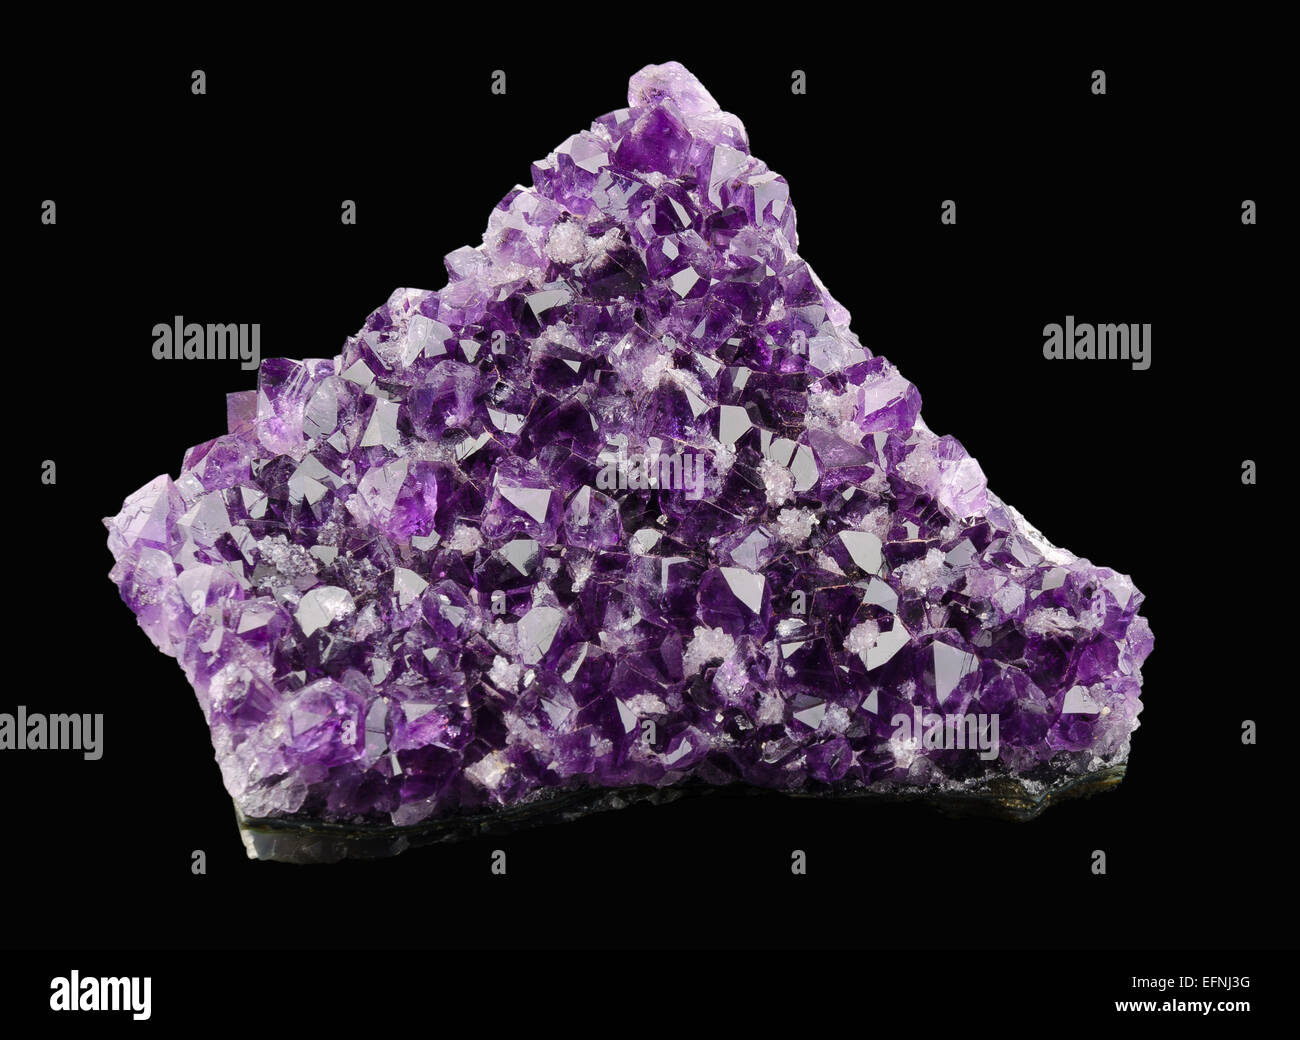 Amethyst on black background, a violet variety of quartz, often used in jewelry. Silica, silicon dioxide, SiO2. Stock Photo